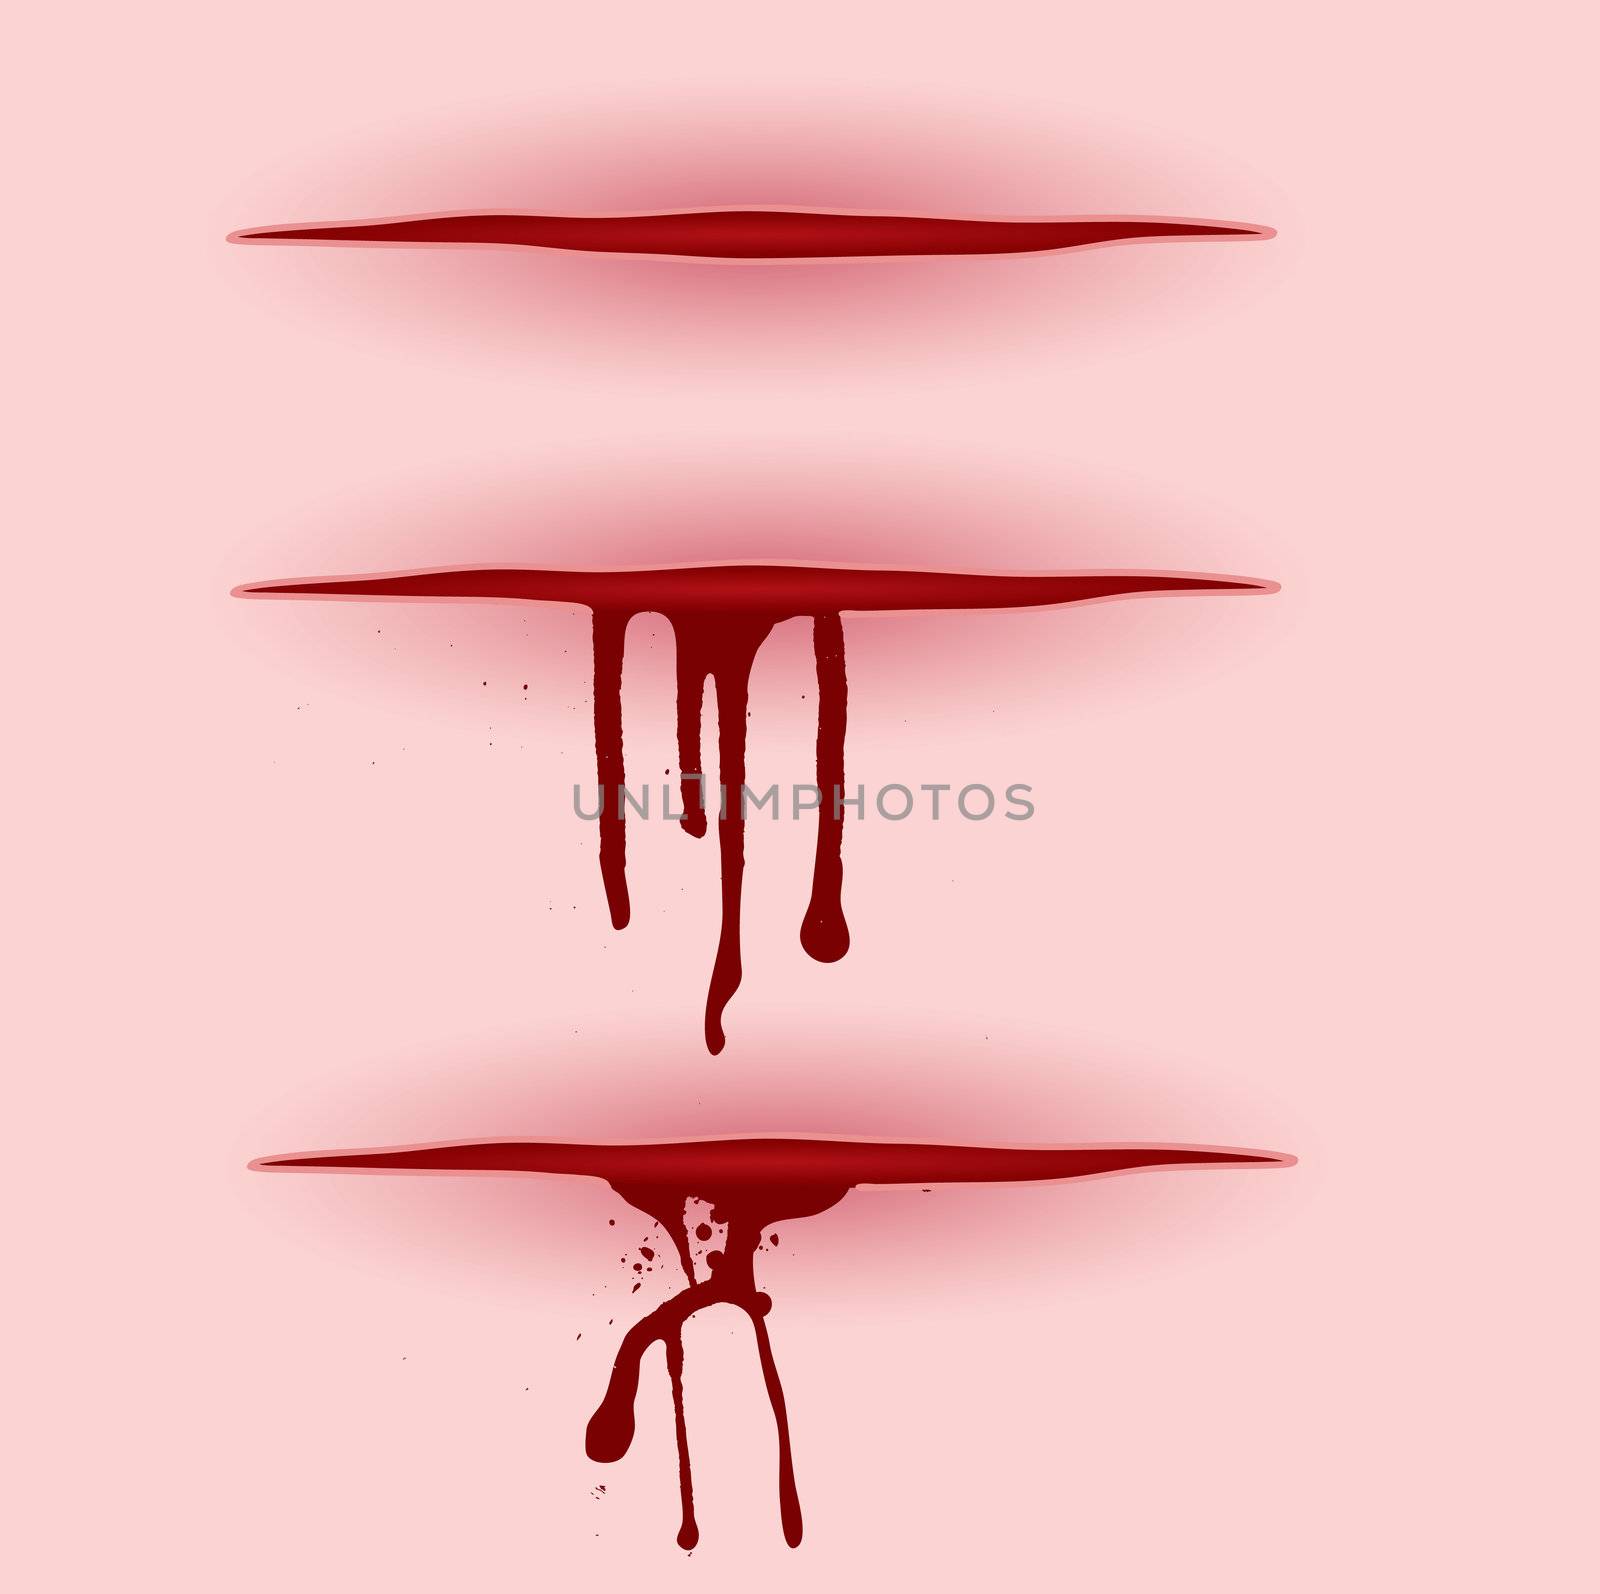 Three illustrated open wounds with blood pooring from them